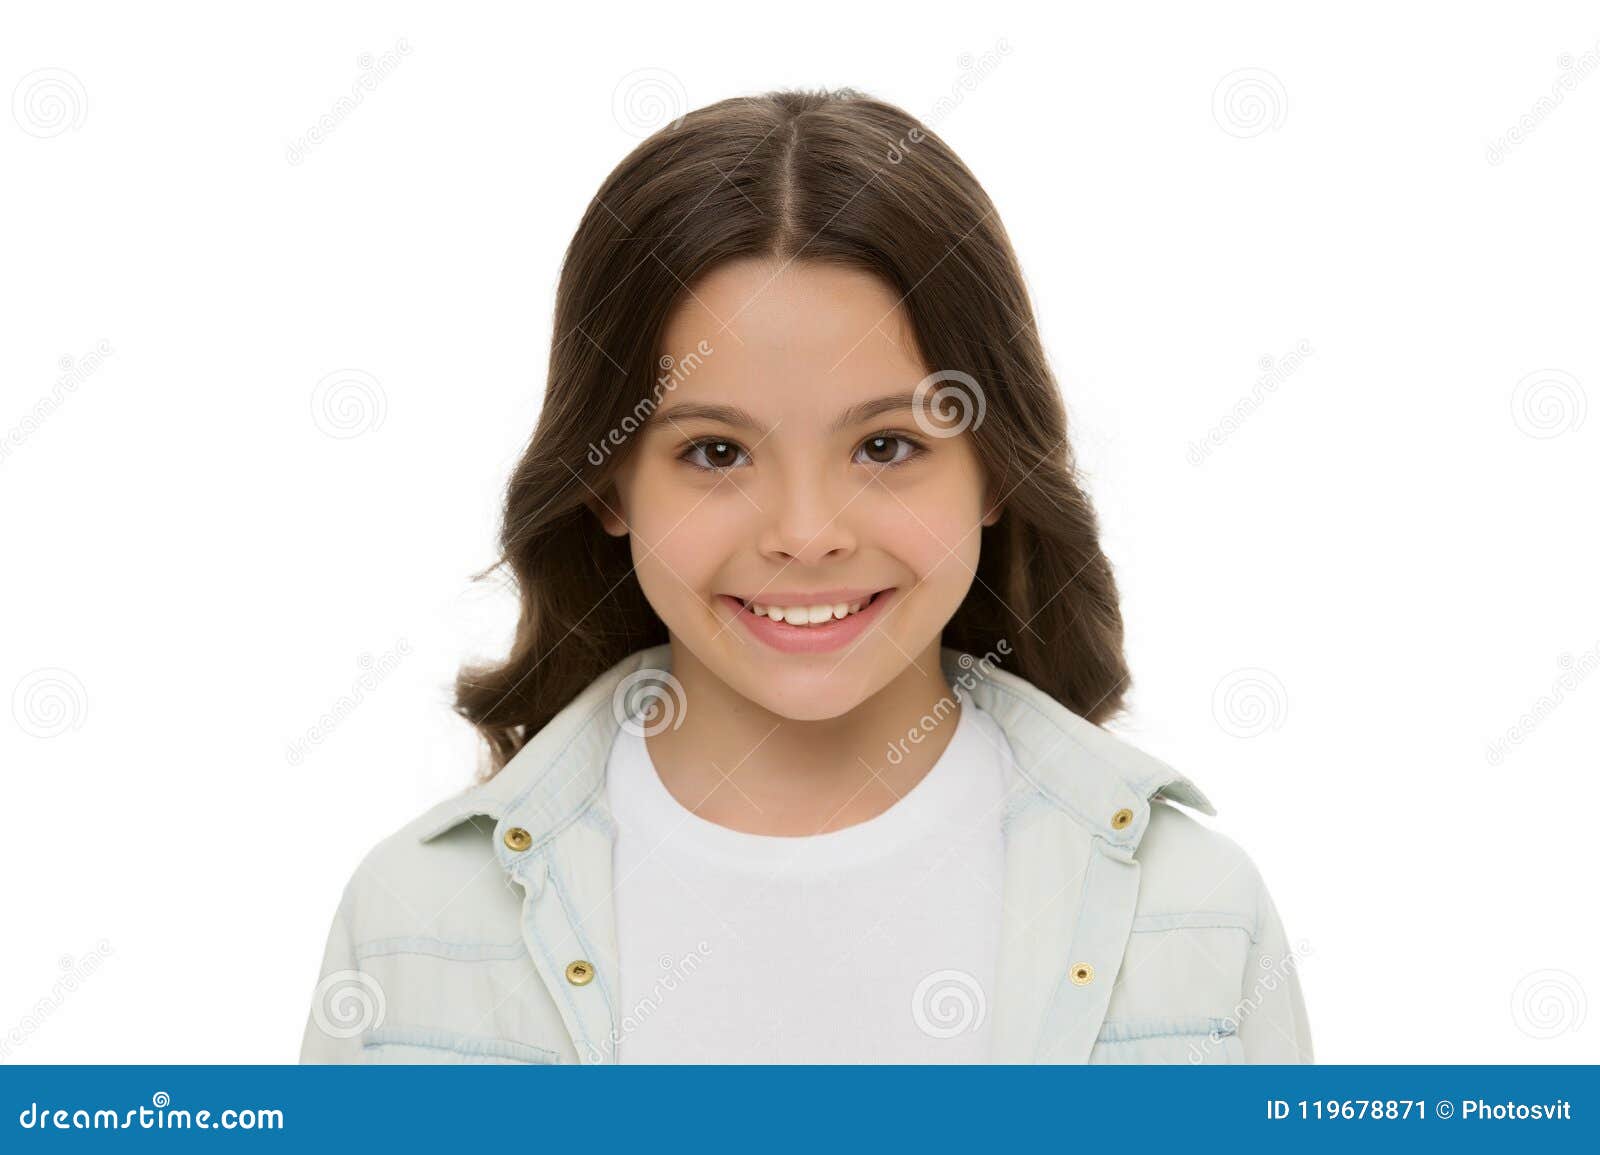 child charming smile  white background close up. charming cutie. kid girl long curly hair posing cheerful happy